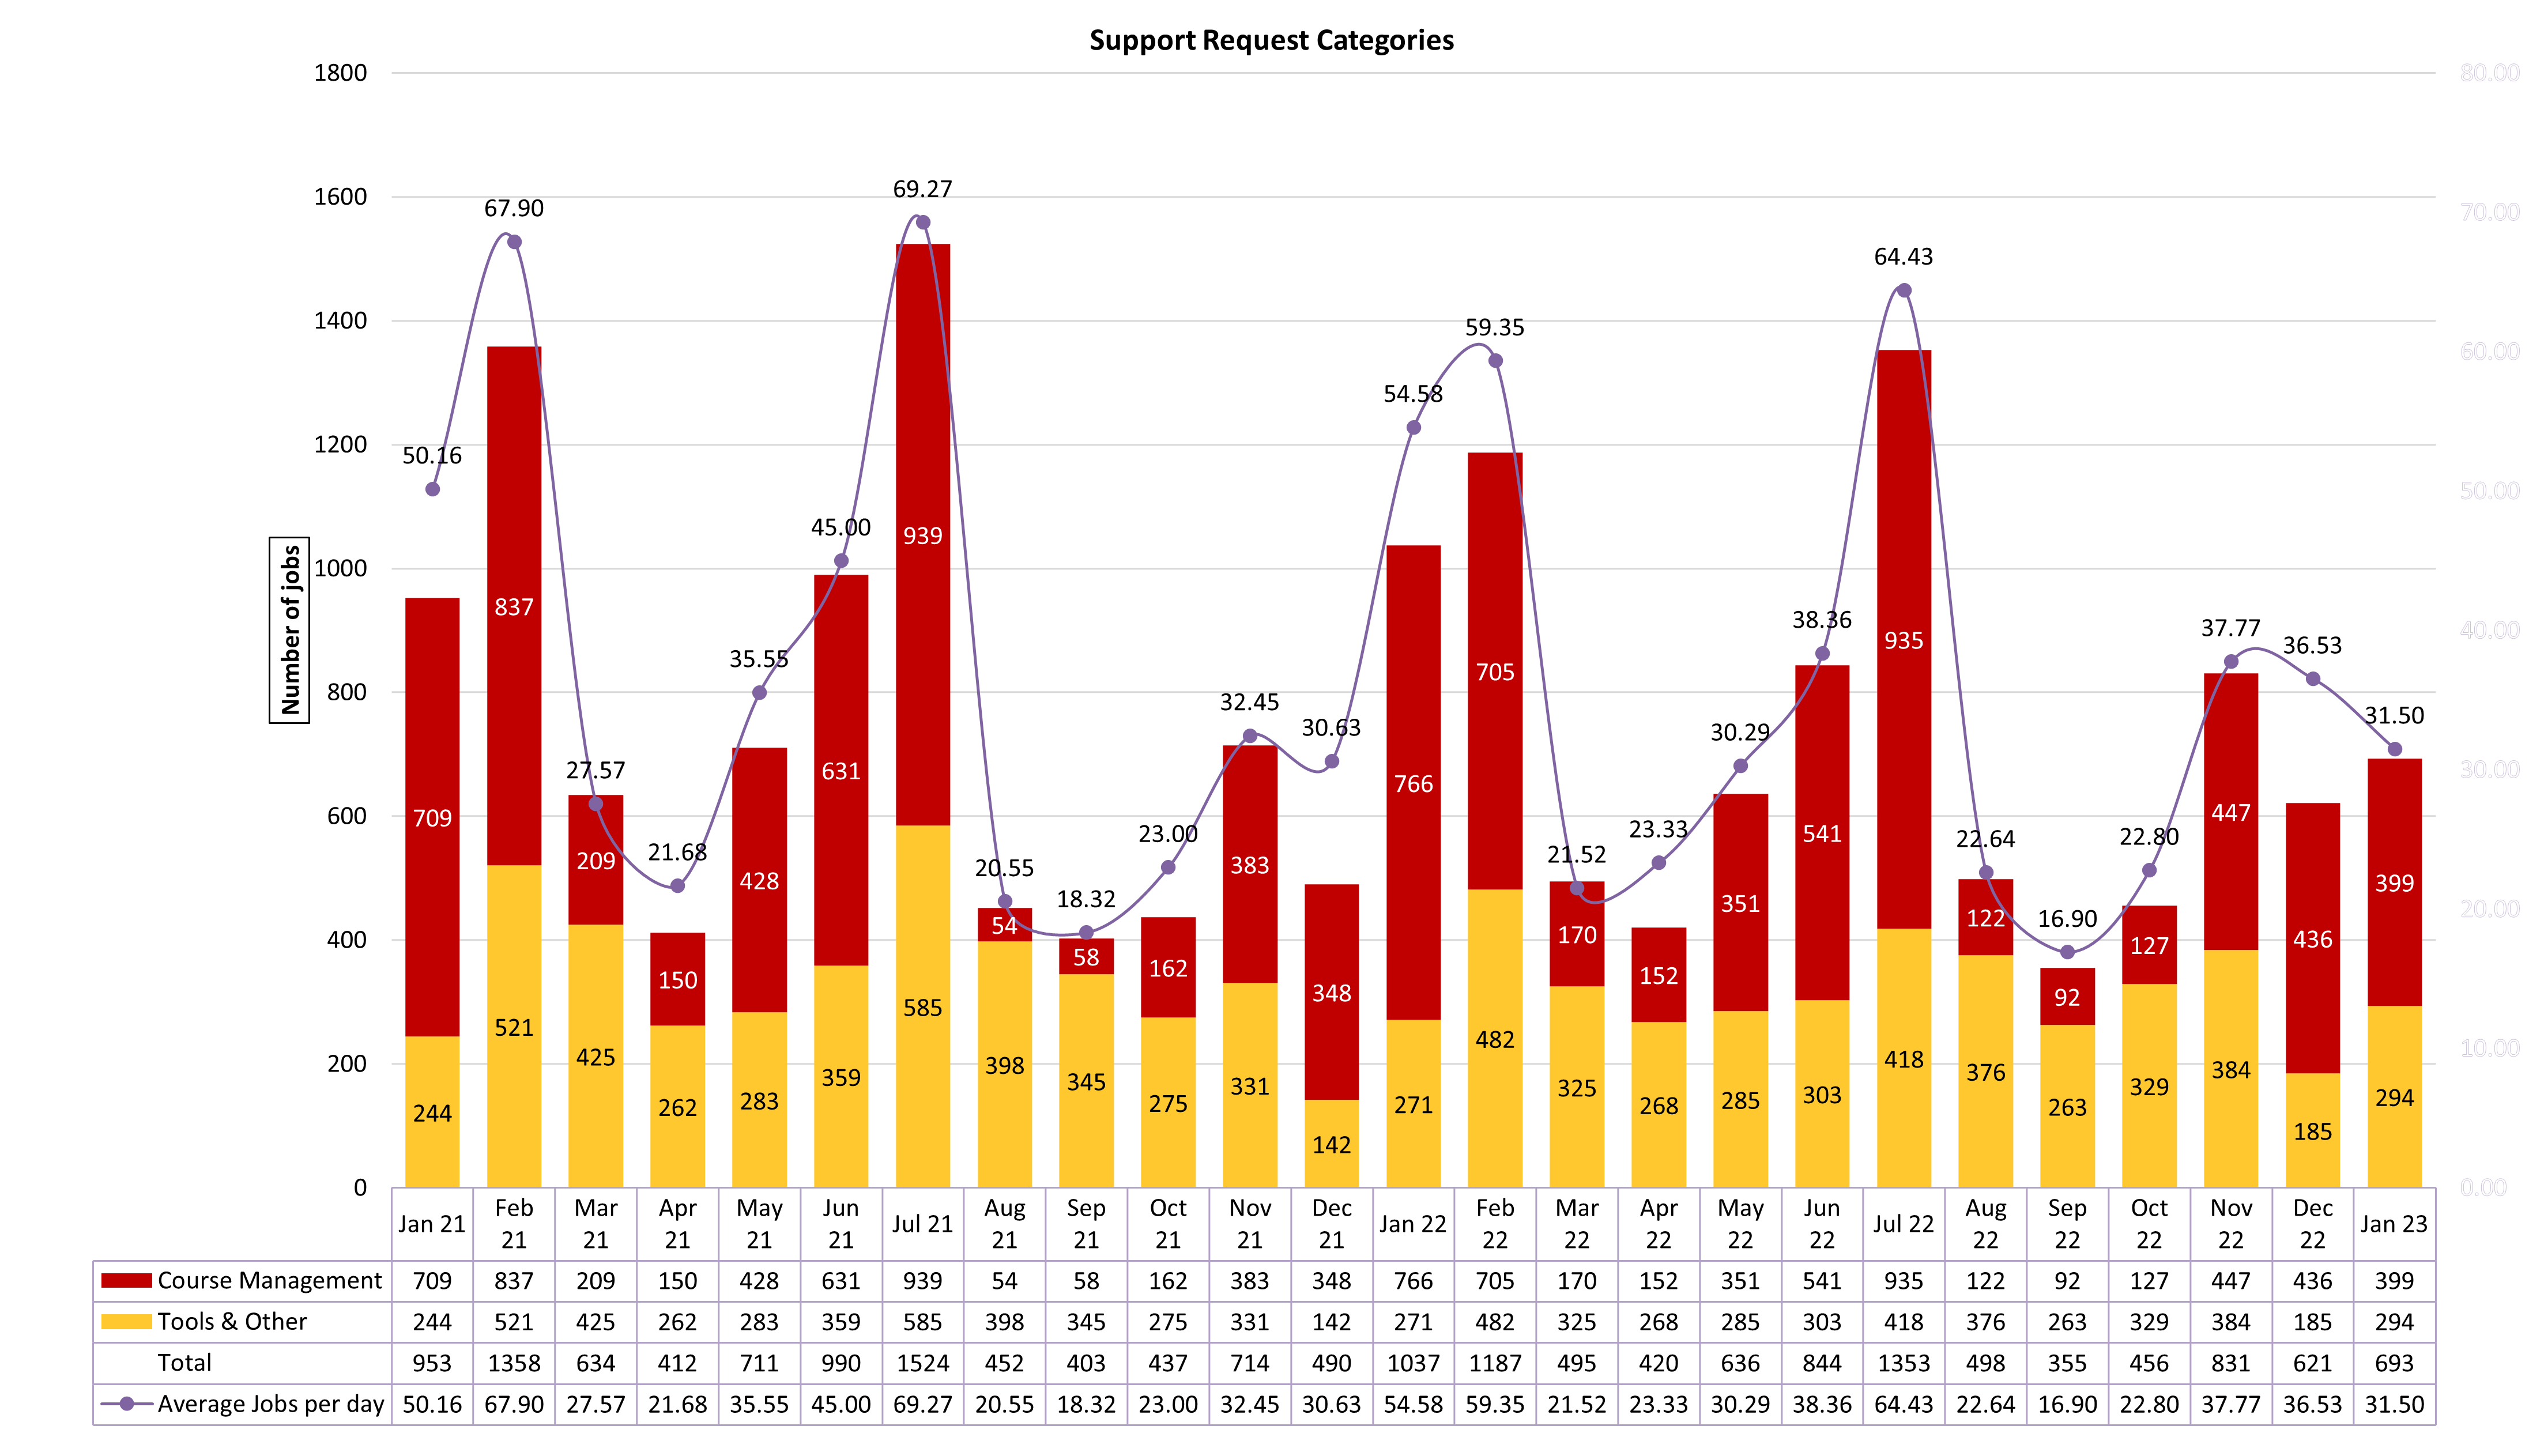 Chart of Support Request Categories from January 2021 to January 2023